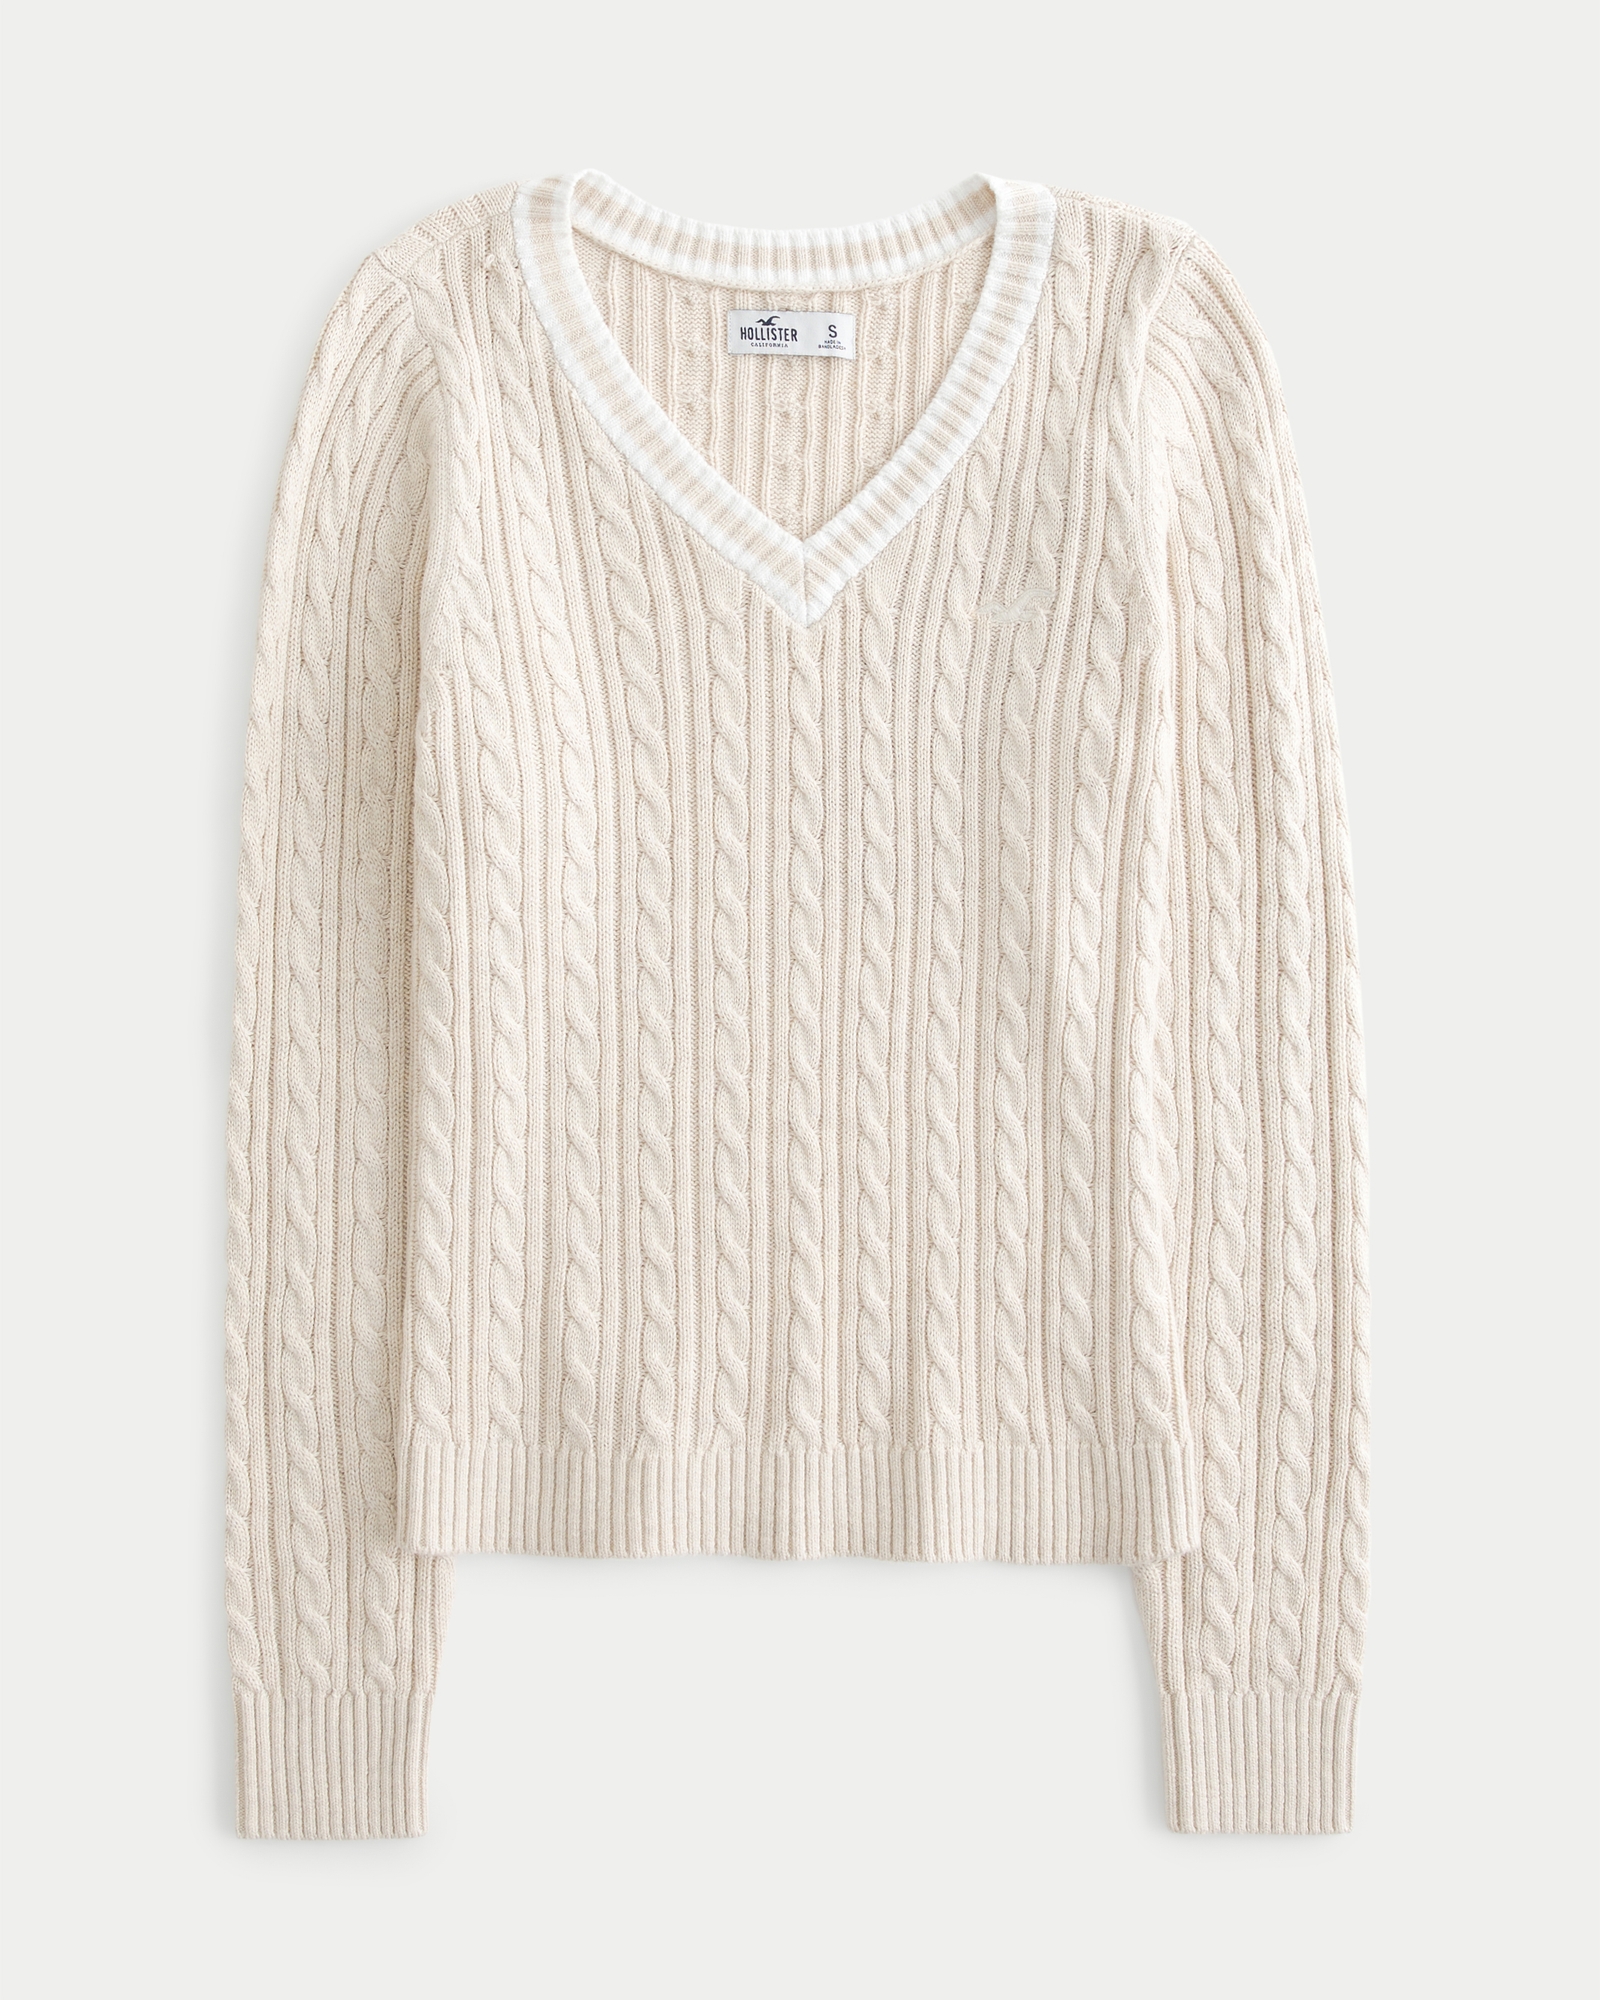 https://img.hollisterco.com/is/image/anf/KIC_350-3210-0014-145_prod1.jpg?policy=product-extra-large